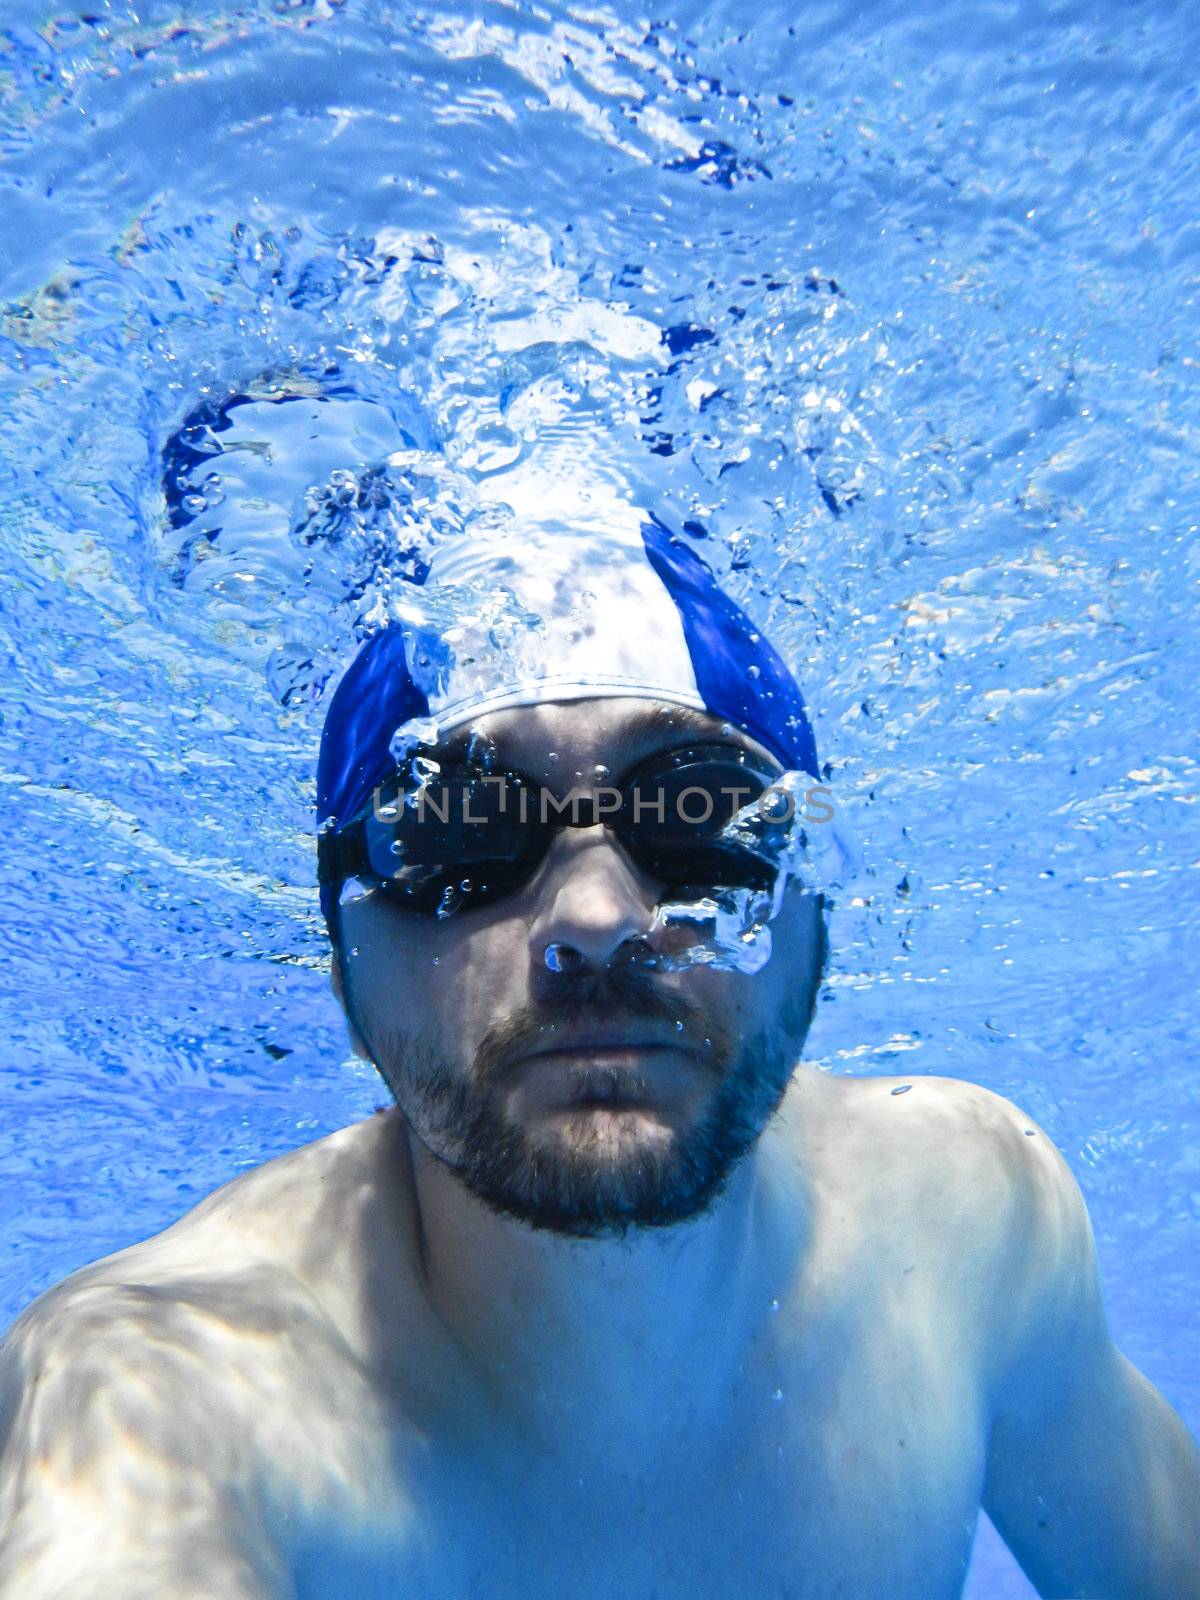 Man swimming with glasses underwater in pool by FernandoCortes